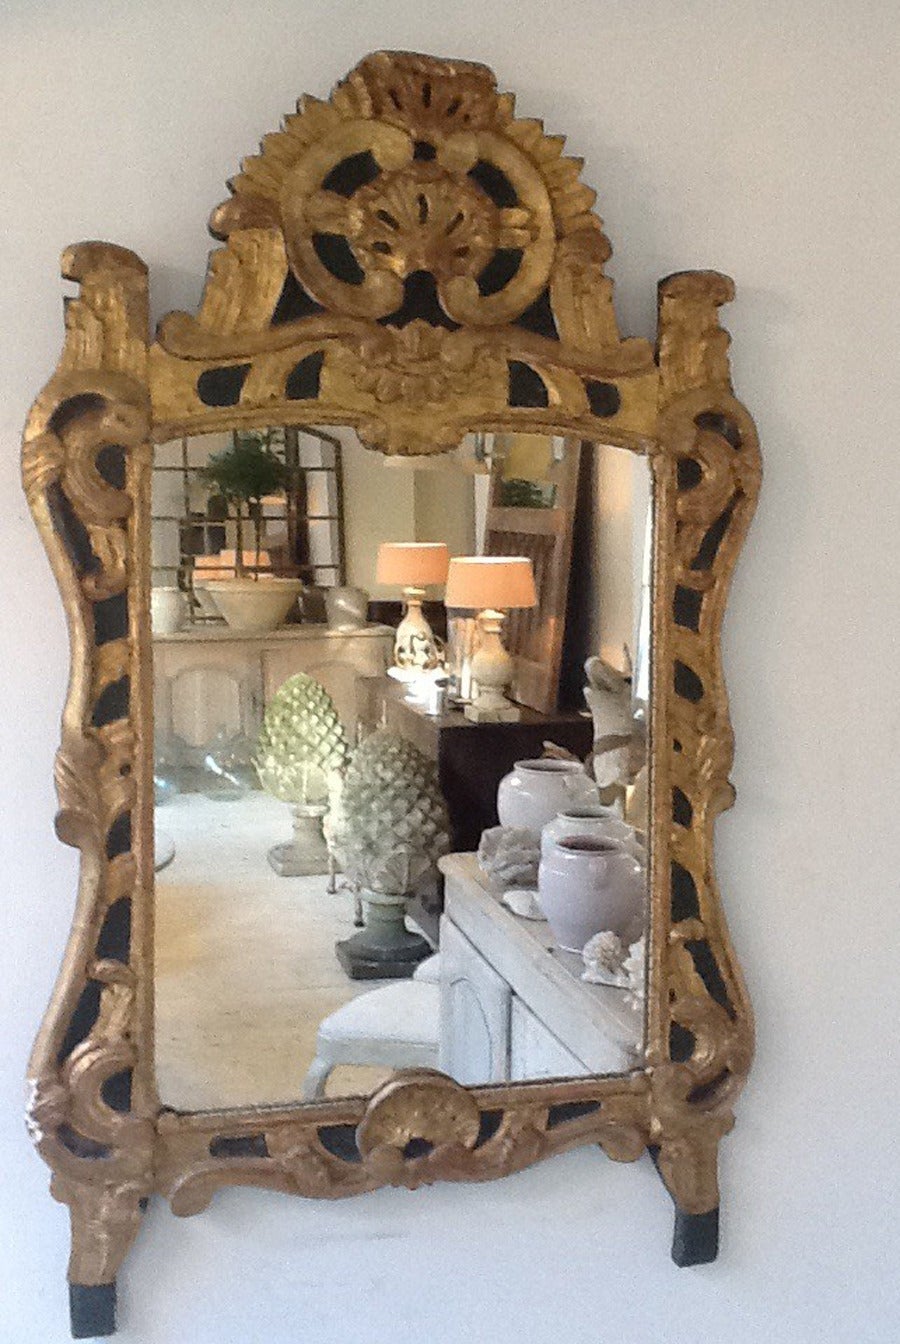 This is a stunning 19th century French Regence-style giltwood carved mirror with original mirror plate.  This mirror features a shell and foliate design with a very dark olive green painted background. We love this mirror’s aged gilt patina and